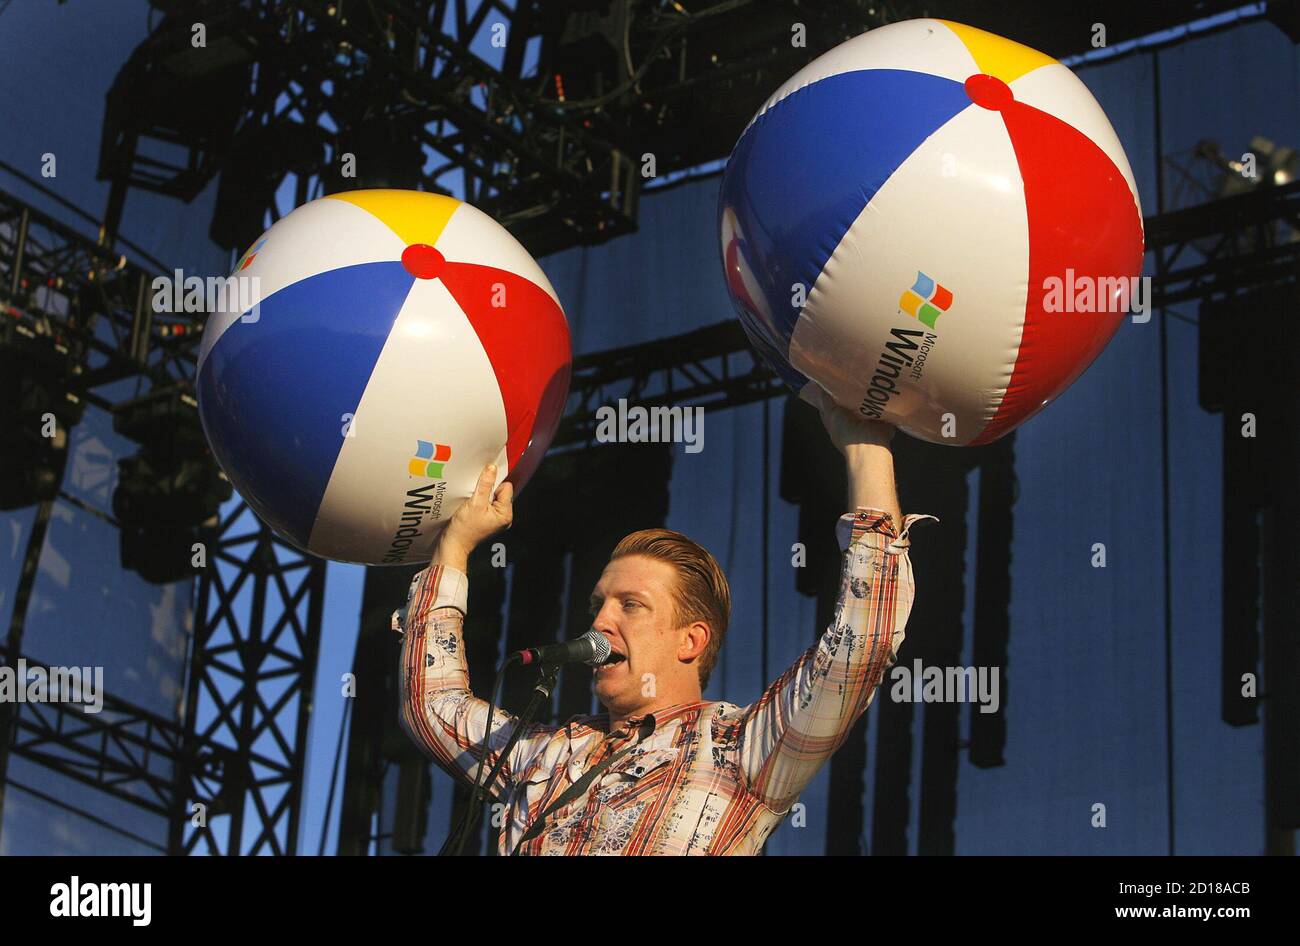 Josh Homme from the music group Queens of the Stone Age holds up inflatable  balls as he commends the residents of New Orleans on their resilience  during the Voodoo Music Experience concert